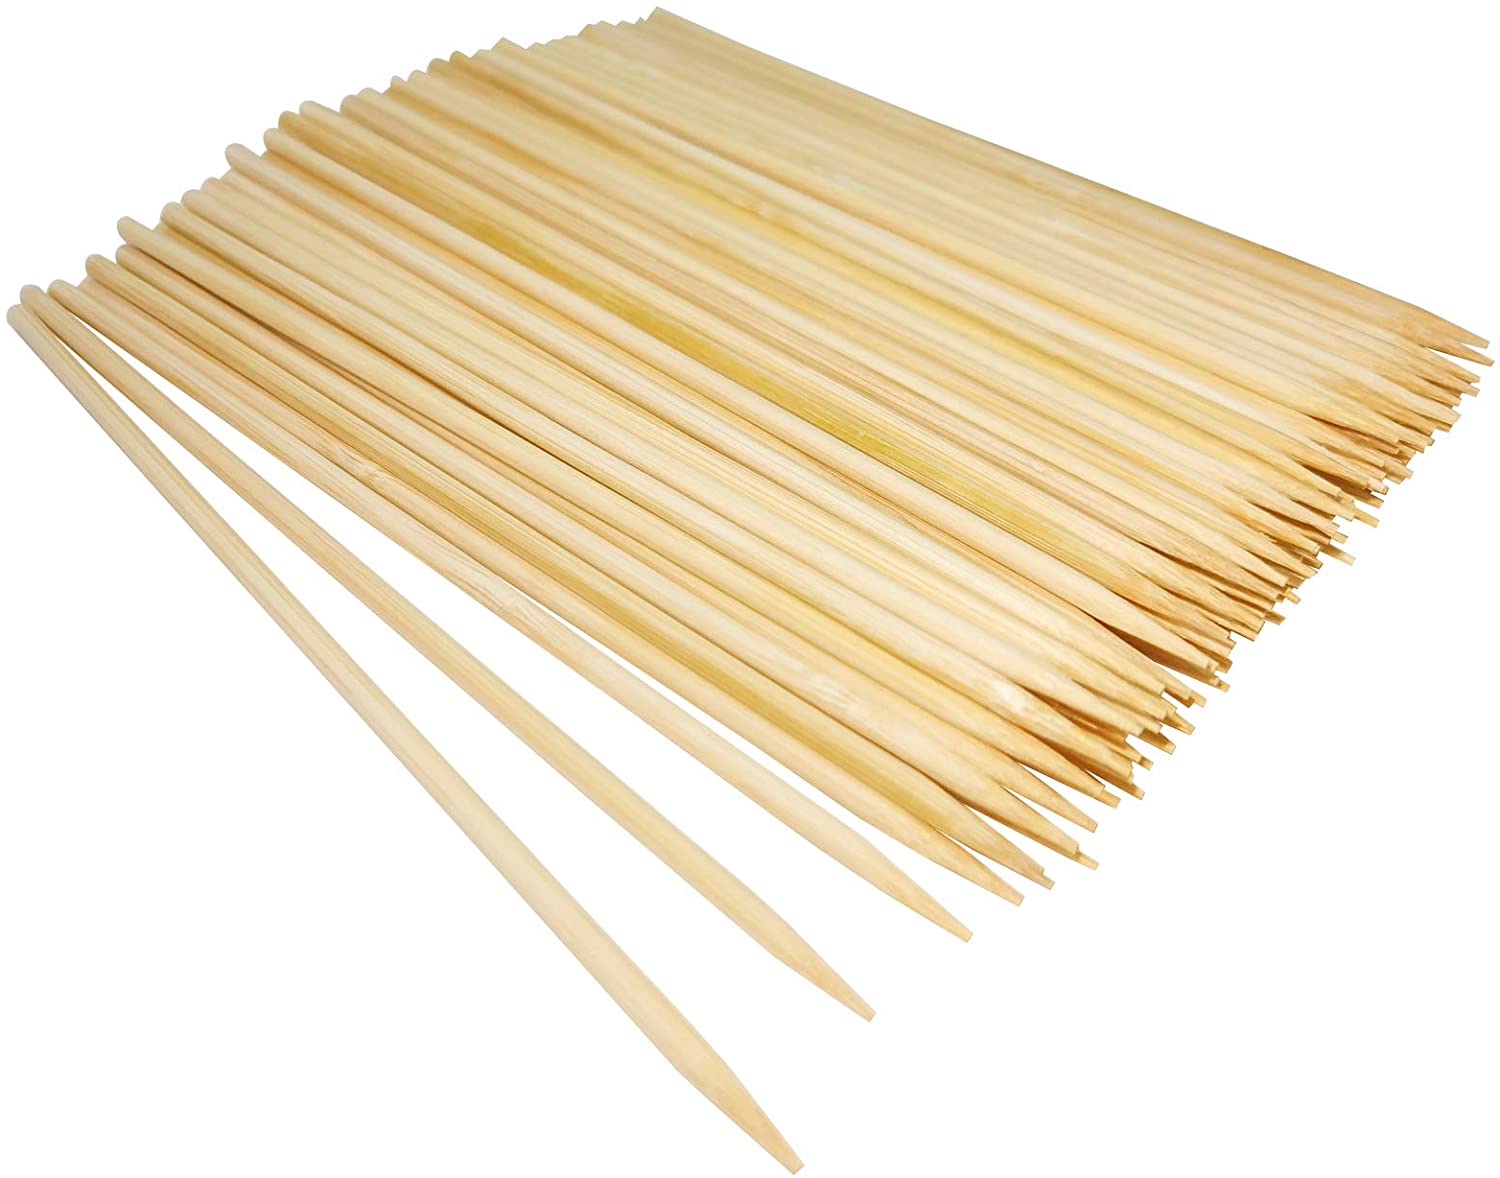 Natural Bamboo Skewers, Wooden Skewers, Skewer Sticks, kebab Sticks, Short Skewers,Wooden Kebab Skewers -Skewers for Fruit Kabobs,Appetizer, Chocolate Fountain, Cocktail More Food,(12-Inch(100pcs))